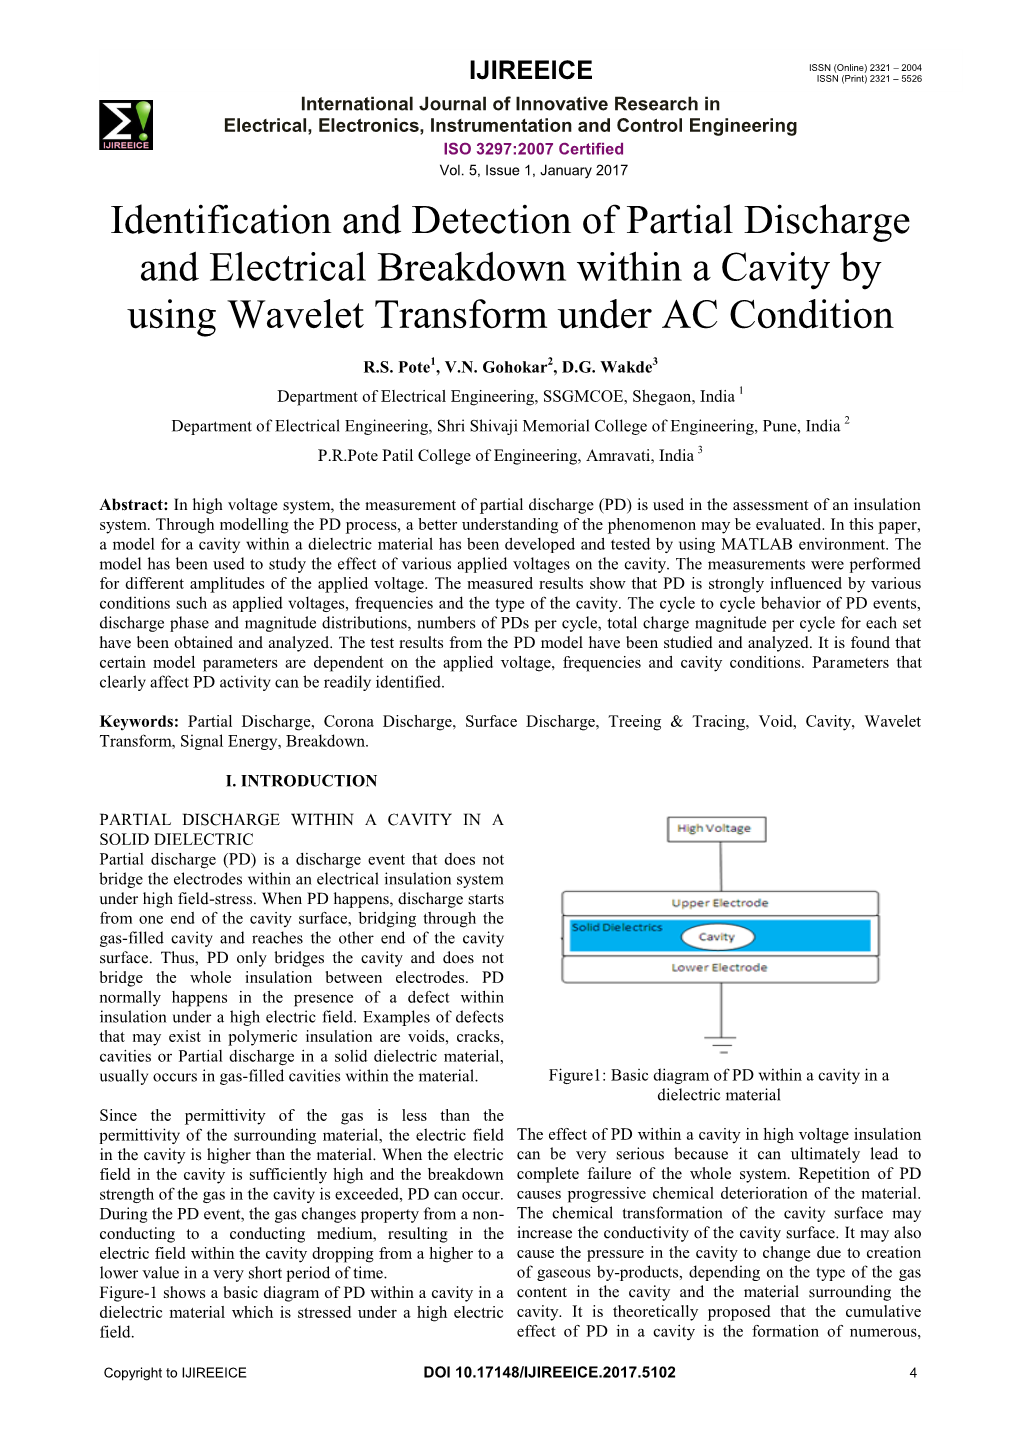 Identification and Detection of Partial Discharge and Electrical Breakdown Within a Cavity by Using Wavelet Transform Under AC Condition